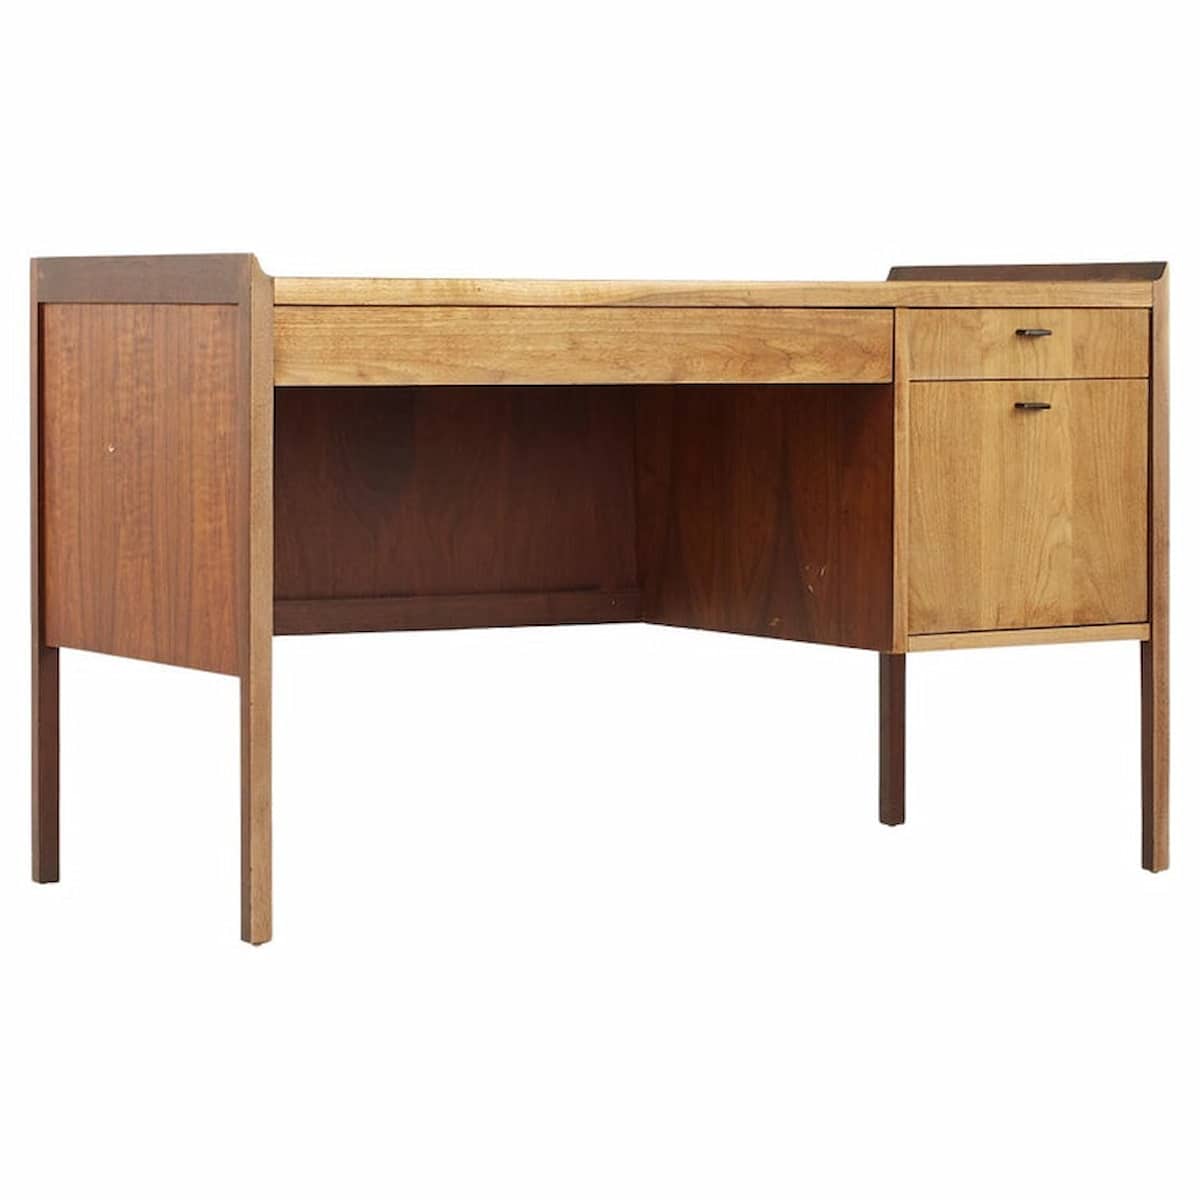 Jack Cartwright for Founders Mid Century Desk